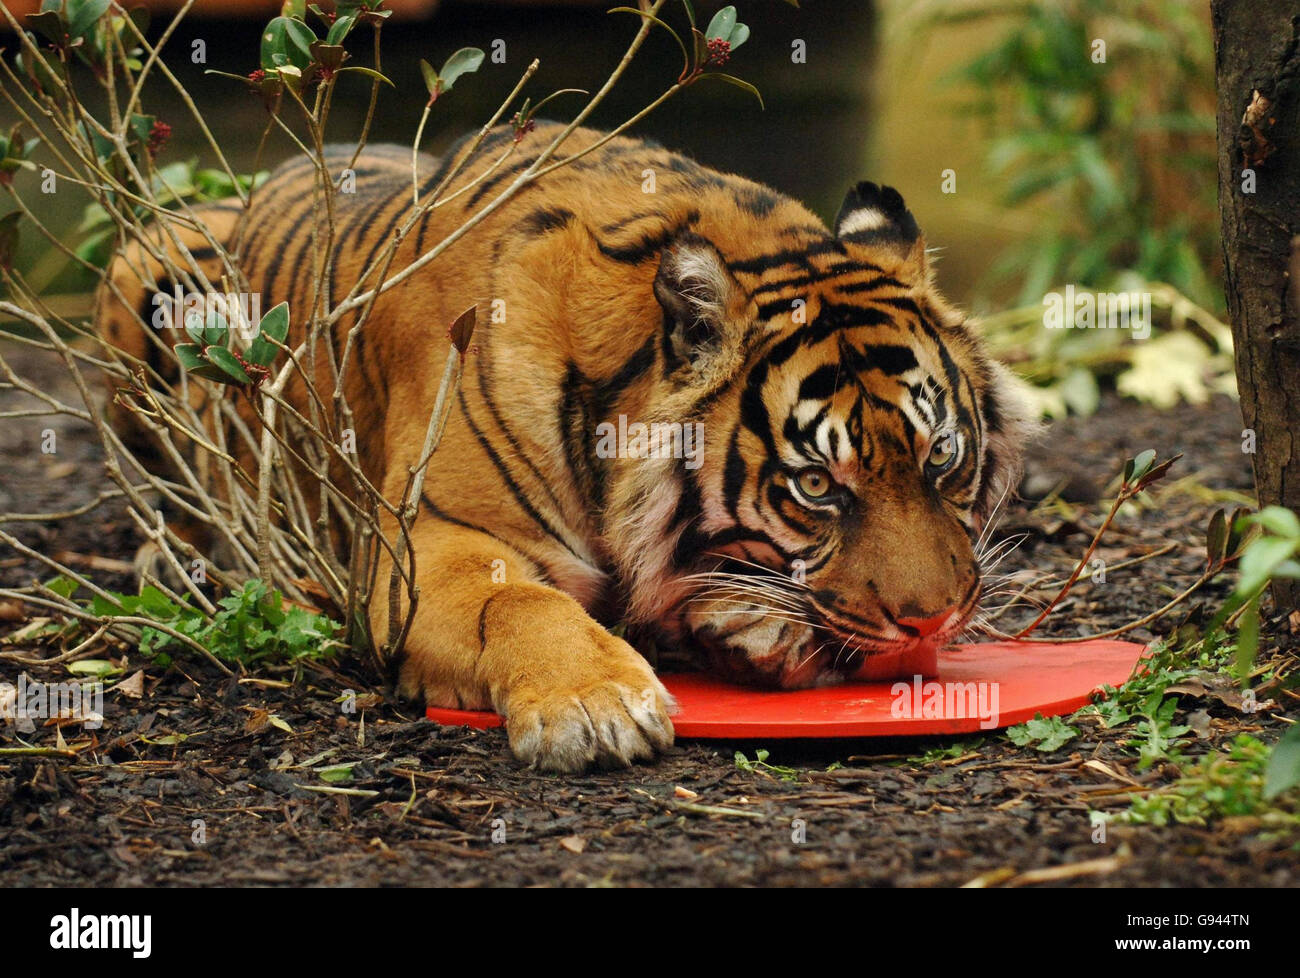 Raika, a female Sumatran tiger, holds a wooden heart sprayed with Calvin Klein's 'Obsession' at London Zoo, Monday February 13, 2006. Sumatran tigers are a critically endangered species, and zookeepers are hoping the designer scent will spice up Raika and her mate Lumpur's love life in time for Valentine's Day. PRESS ASSOCIATION Photo. Photo credit should read: Fiona Hanson/PA. Stock Photo